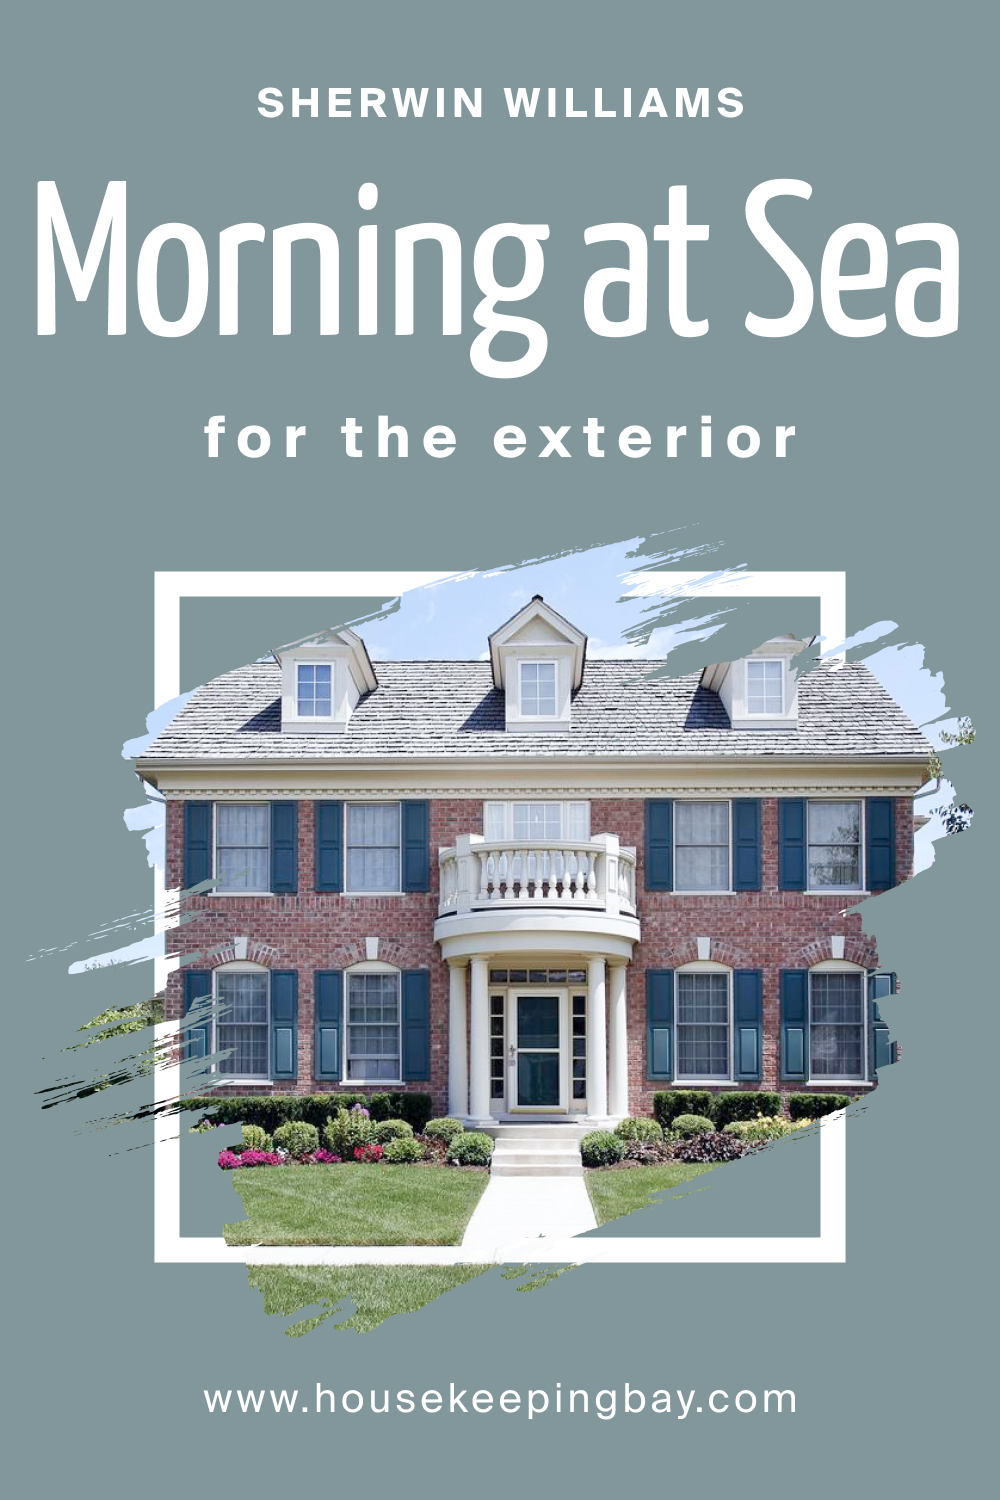 Sherwin Williams. SW 9634 Morning at Sea For the exterior